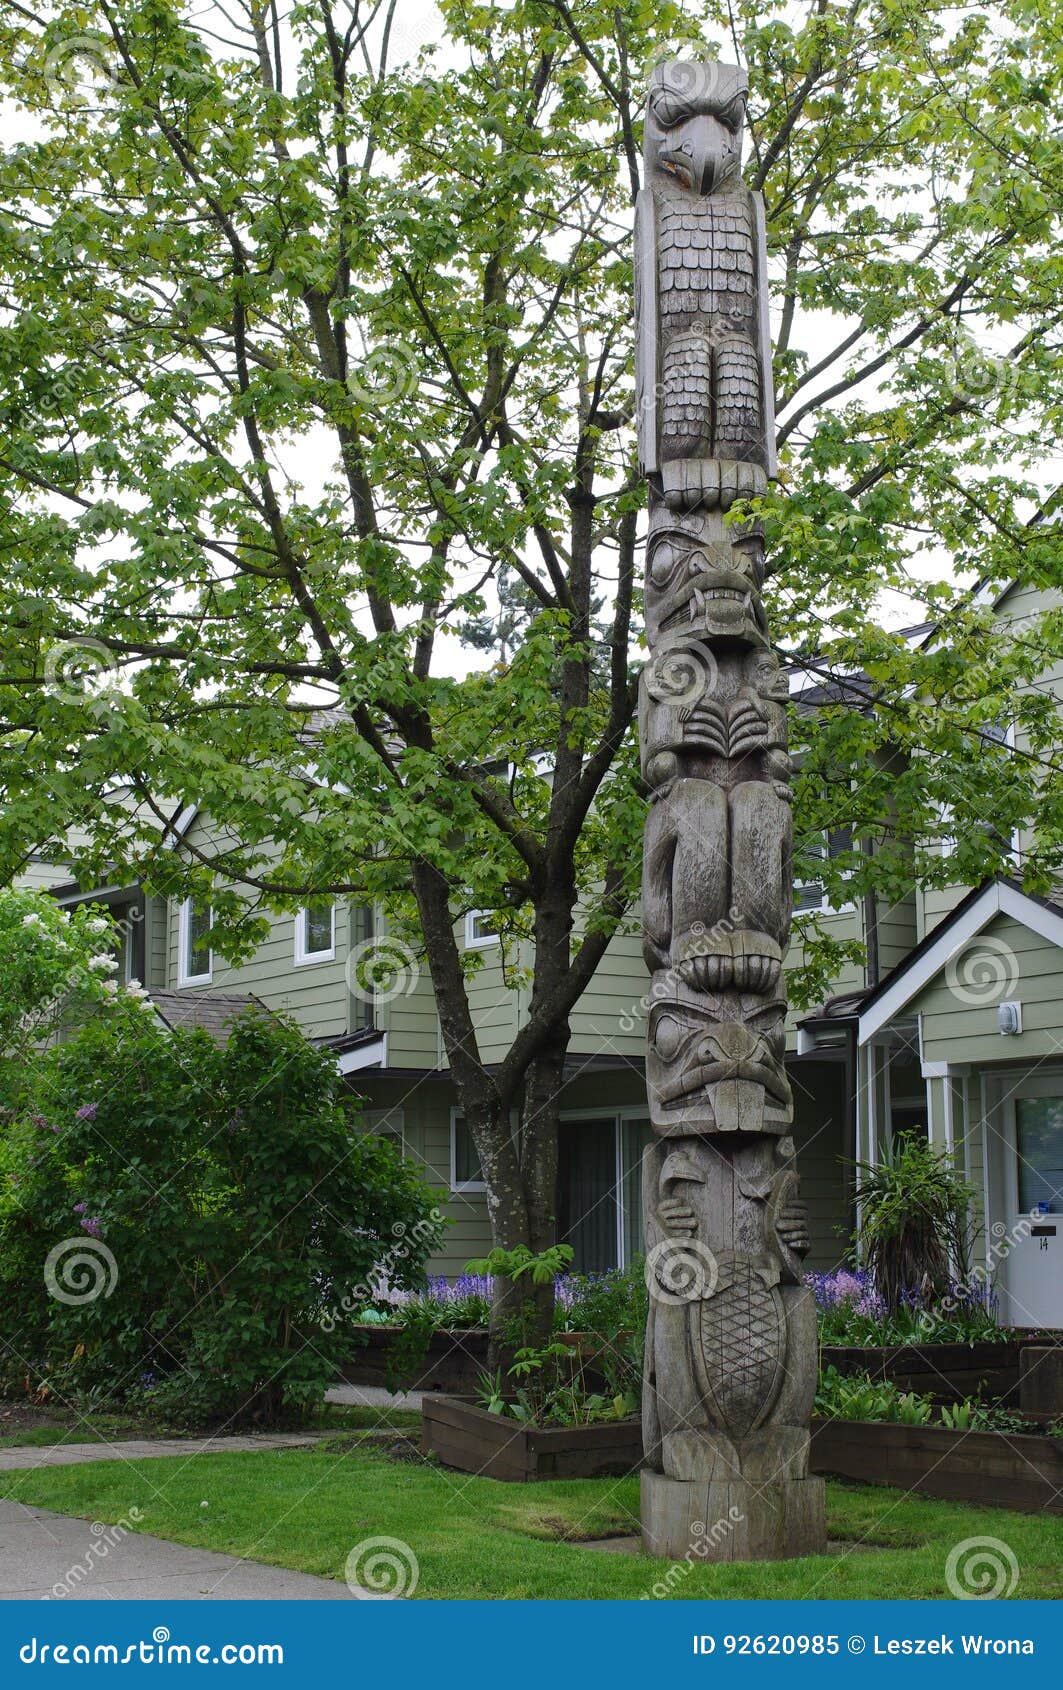 wooden totem pole in front of residential houses